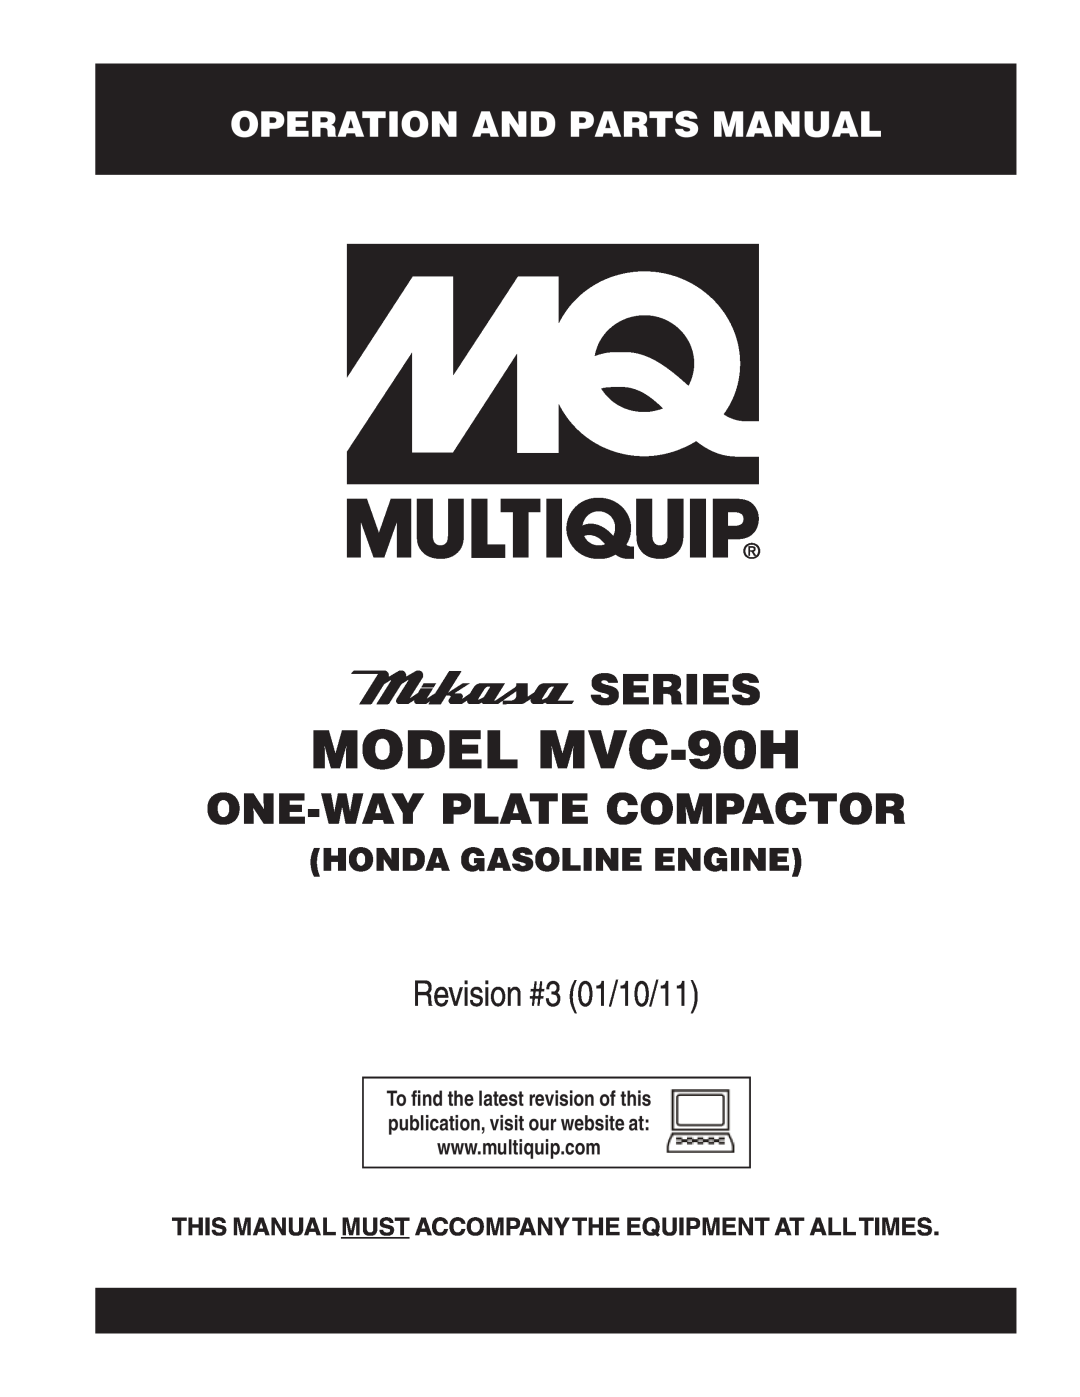 Multiquip manual Operation And Parts Manual, Honda Gasoline Engine, MODEL MVC-90H, Series, One-Wayplate Compactor 